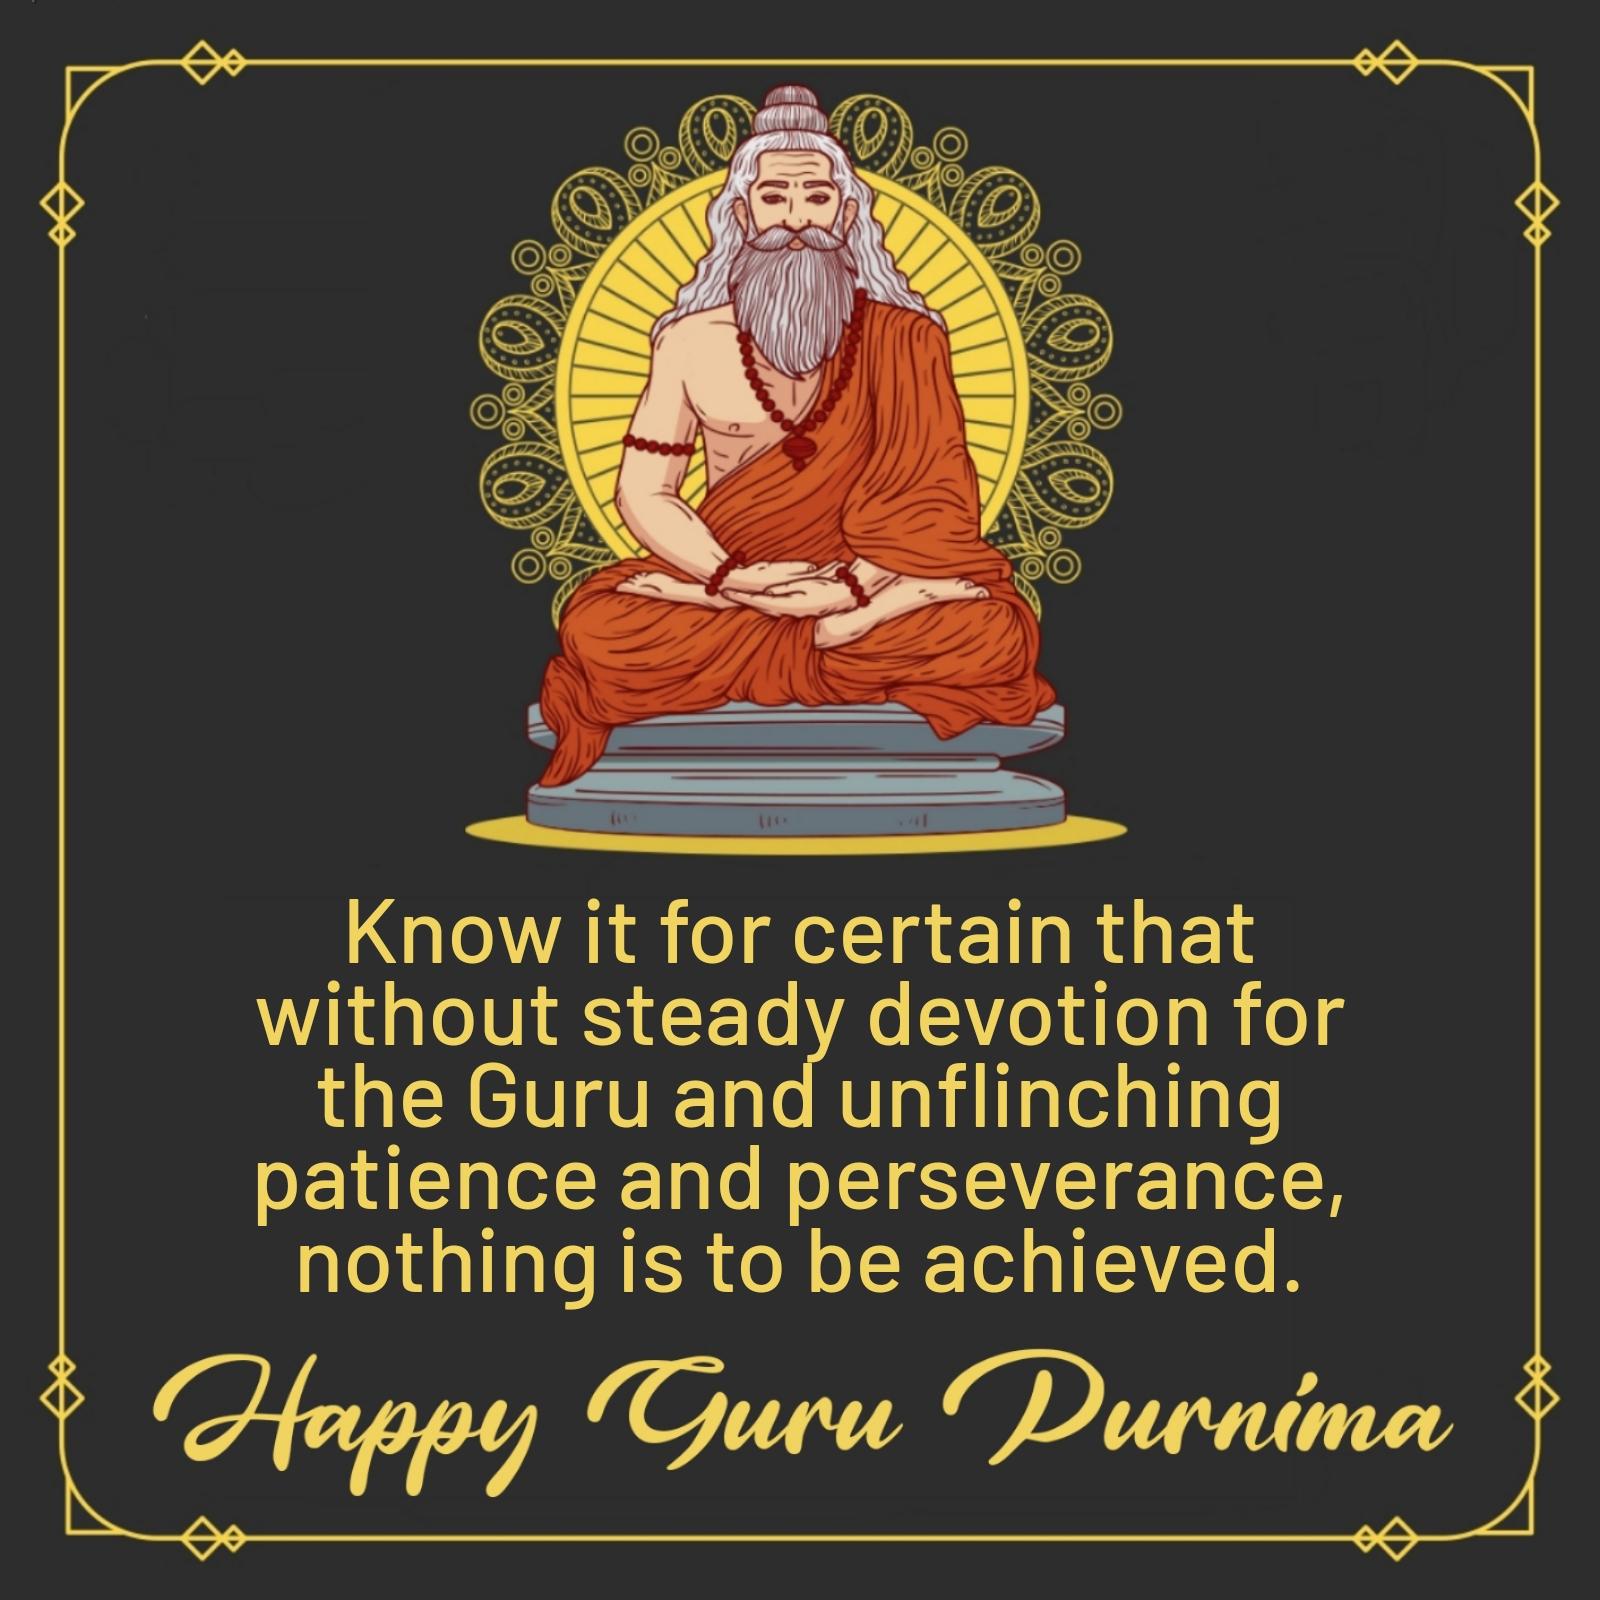 Know it for certain that without steady devotion for the Guru